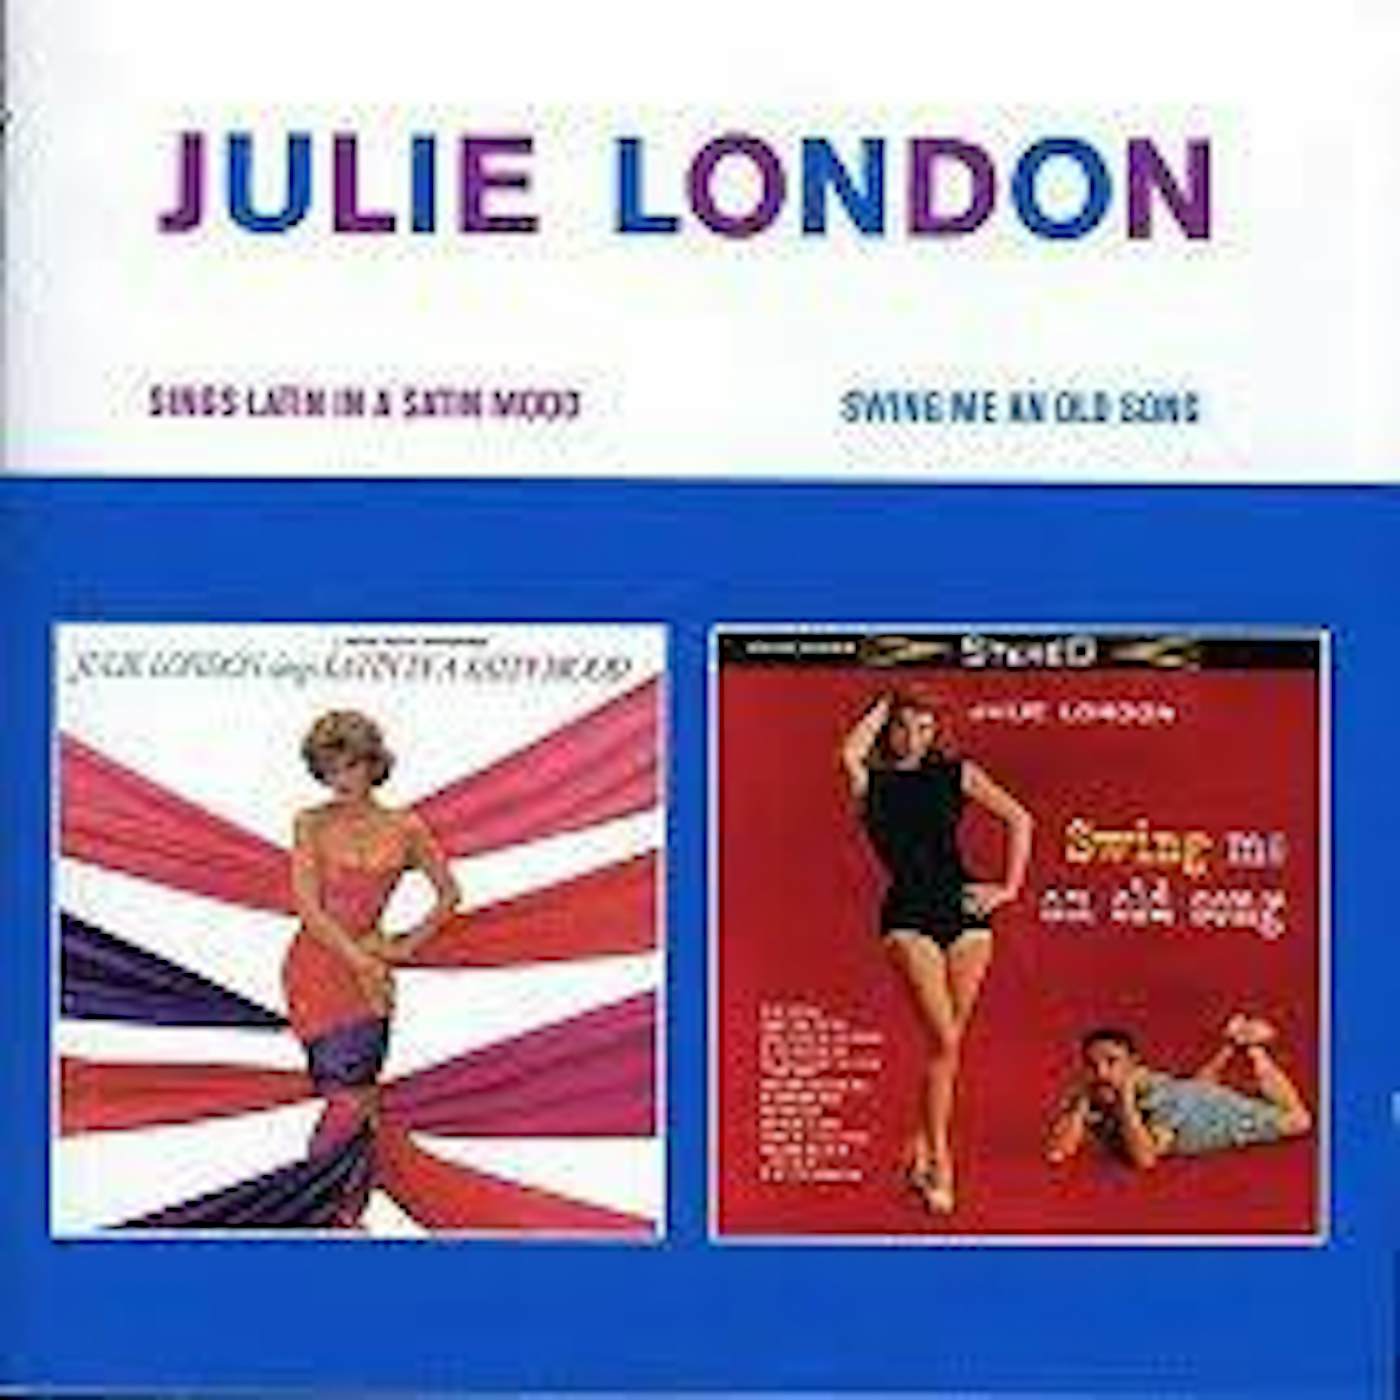 Julie London SINGS LATIN IN A SATIN MOOD & SWING ME AN OLD SONG CD